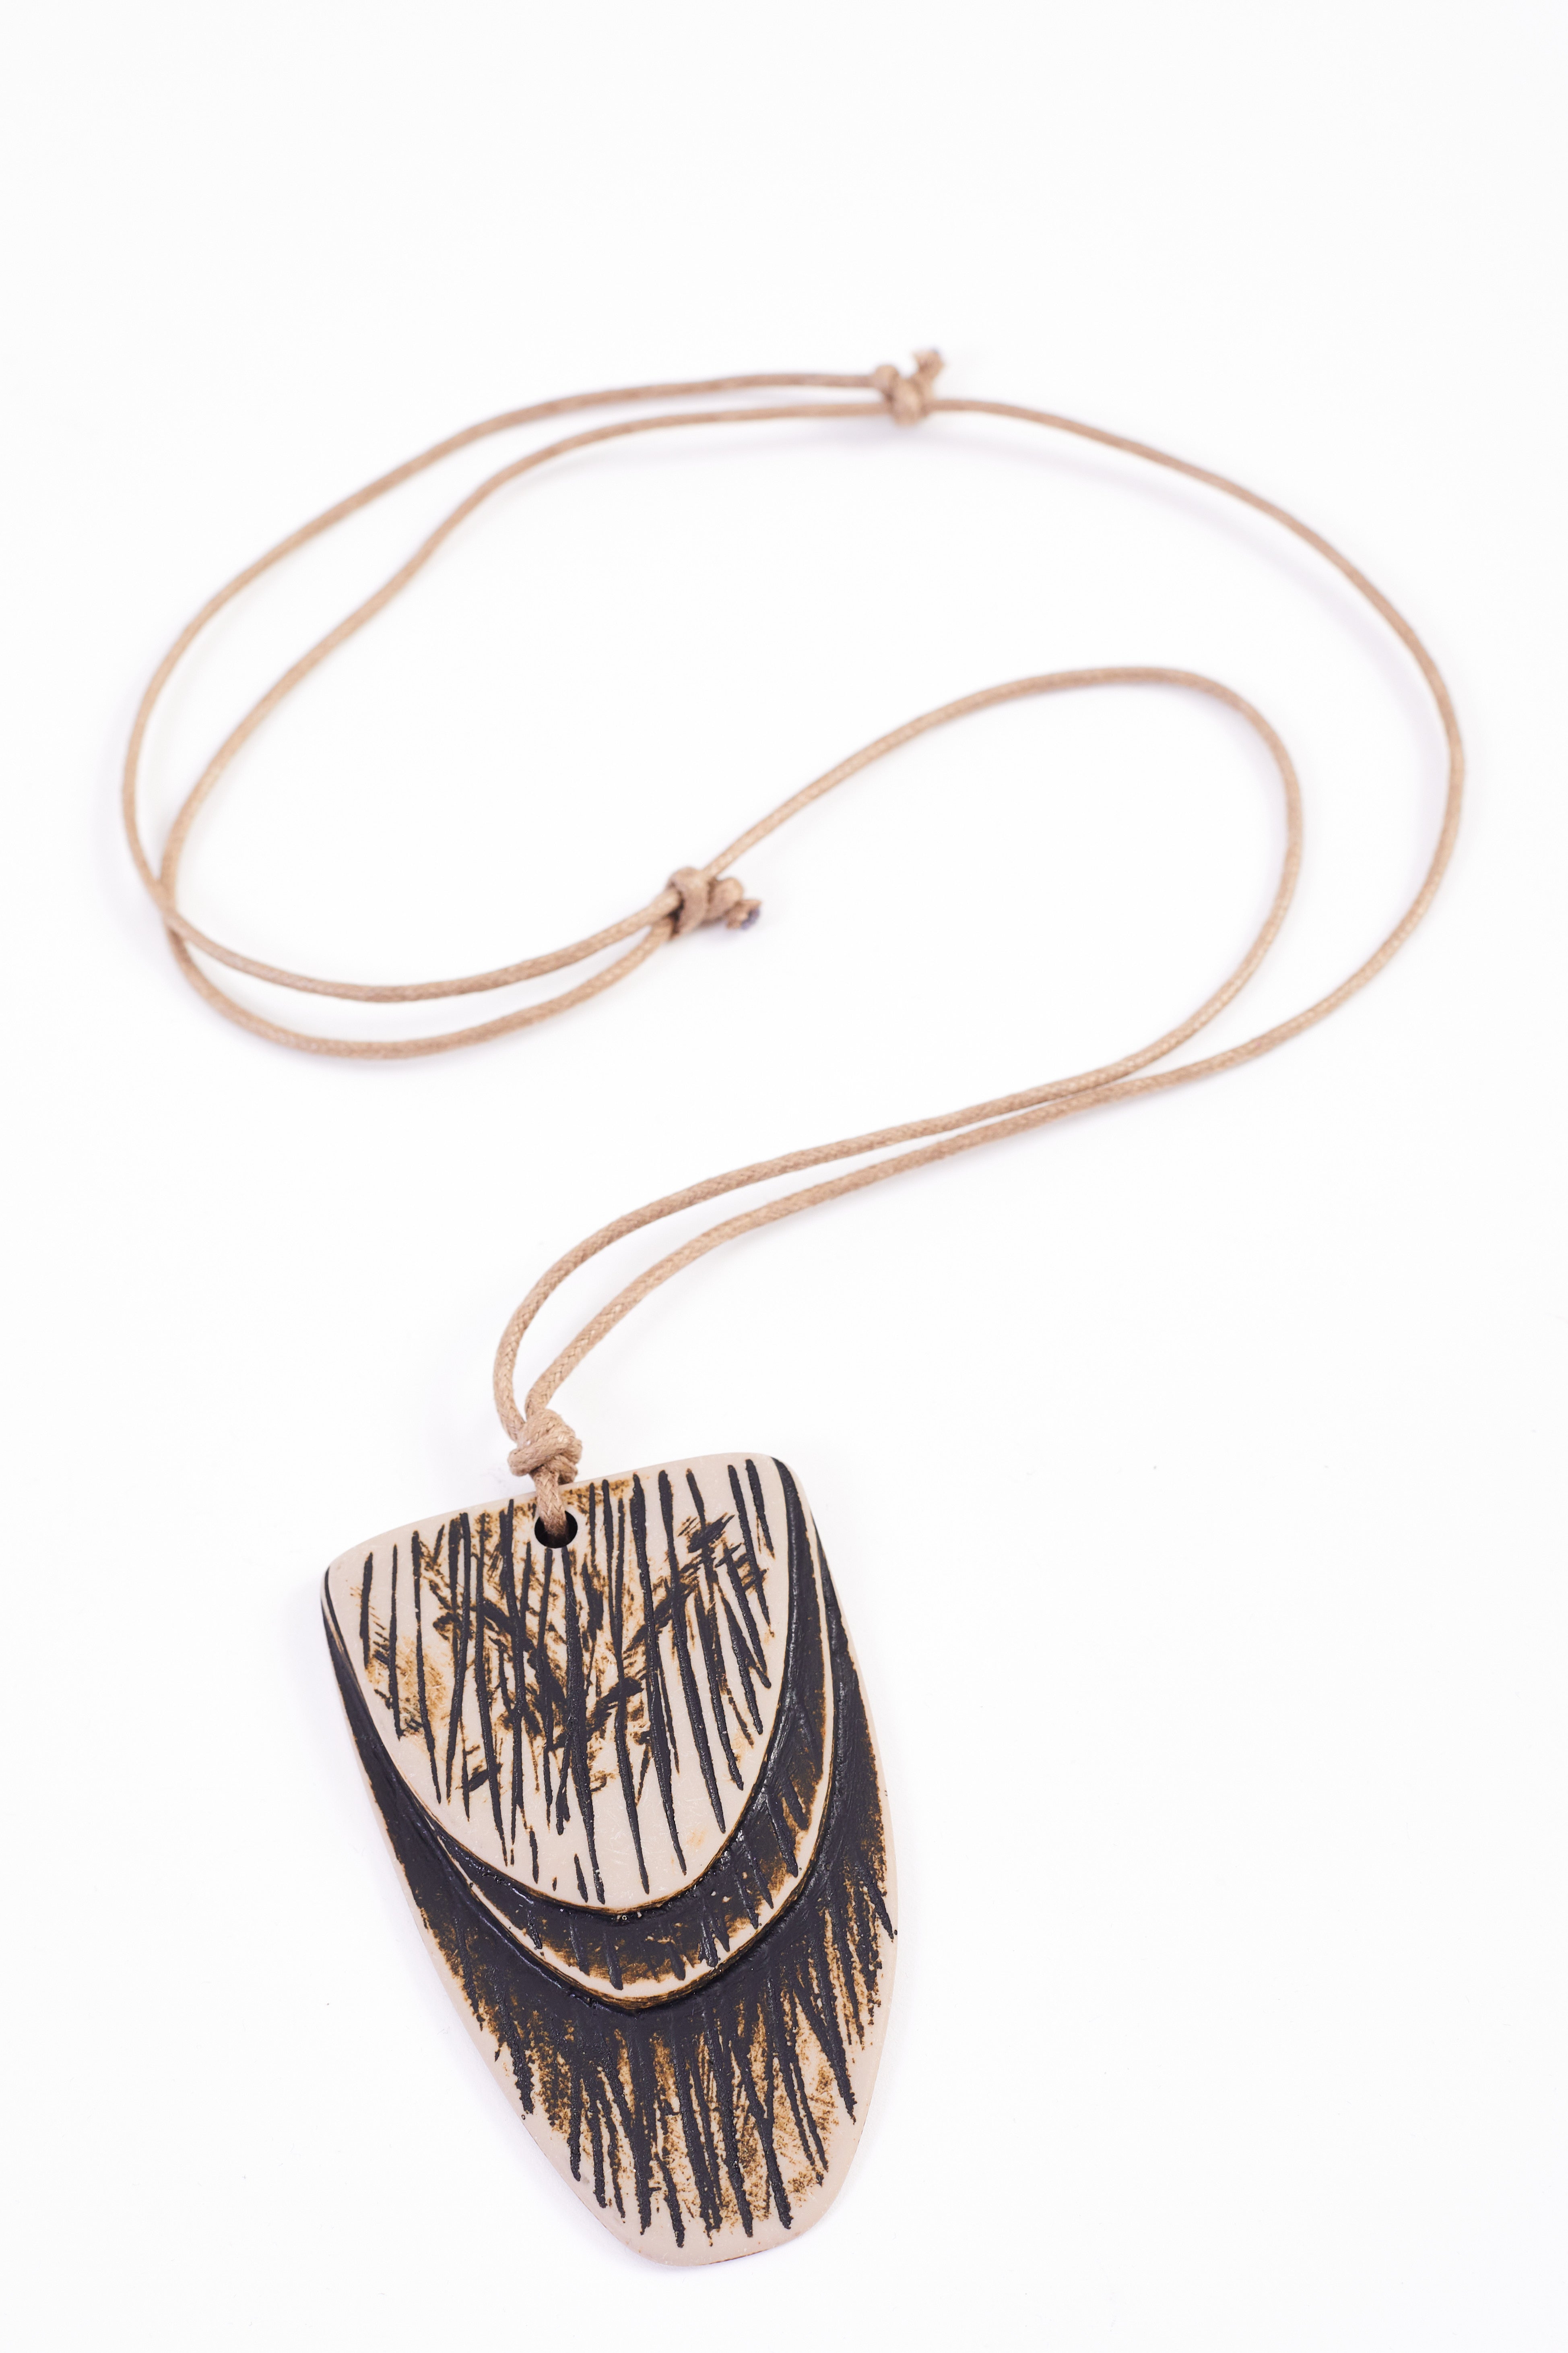 Scratch Necklace in Black and Mink